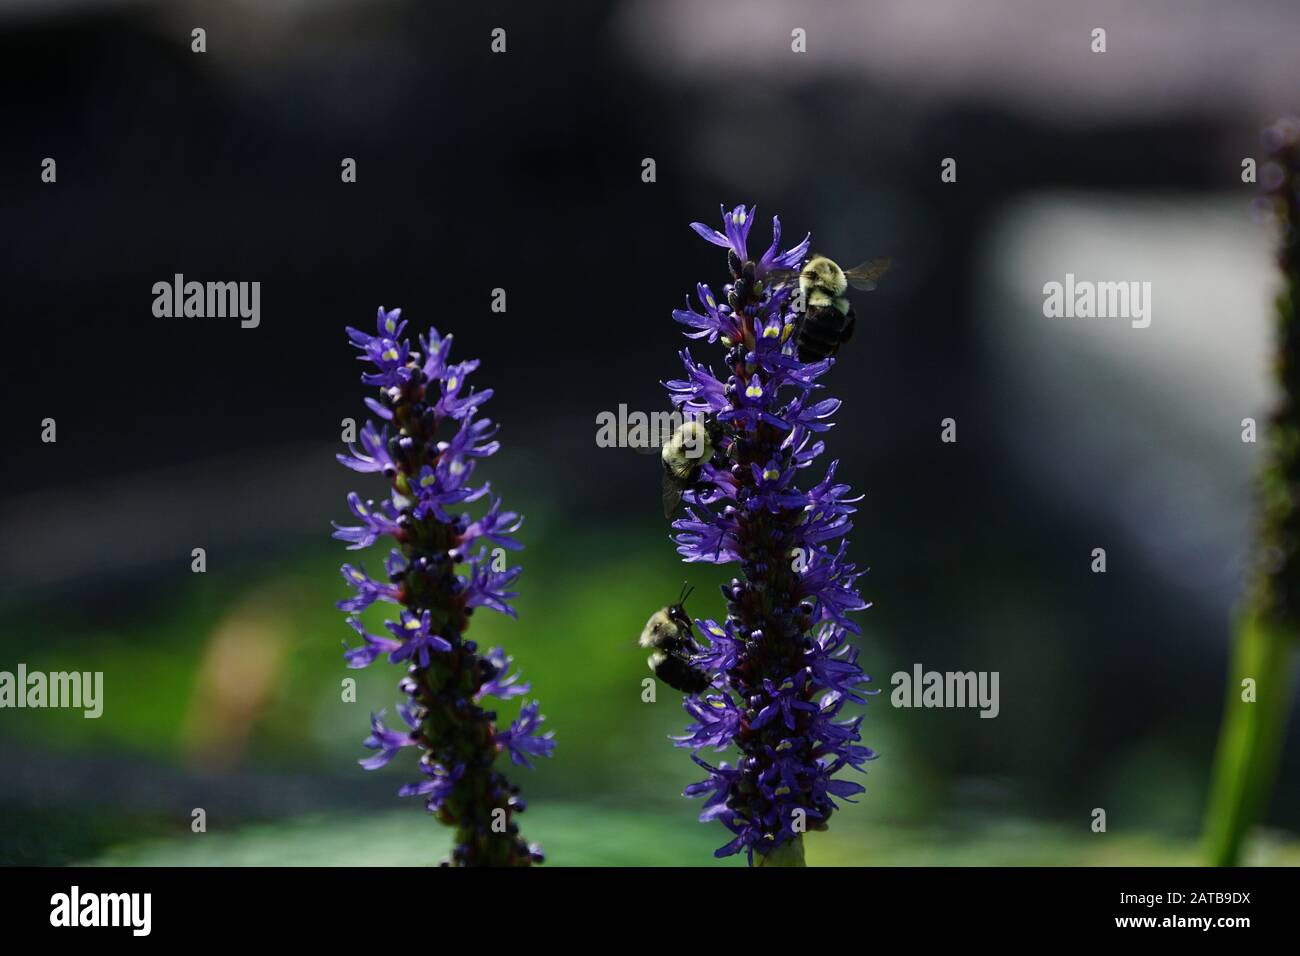 Bumble Bees Sipping Nectar from a Purple Hyacinth Flower Stock Photo